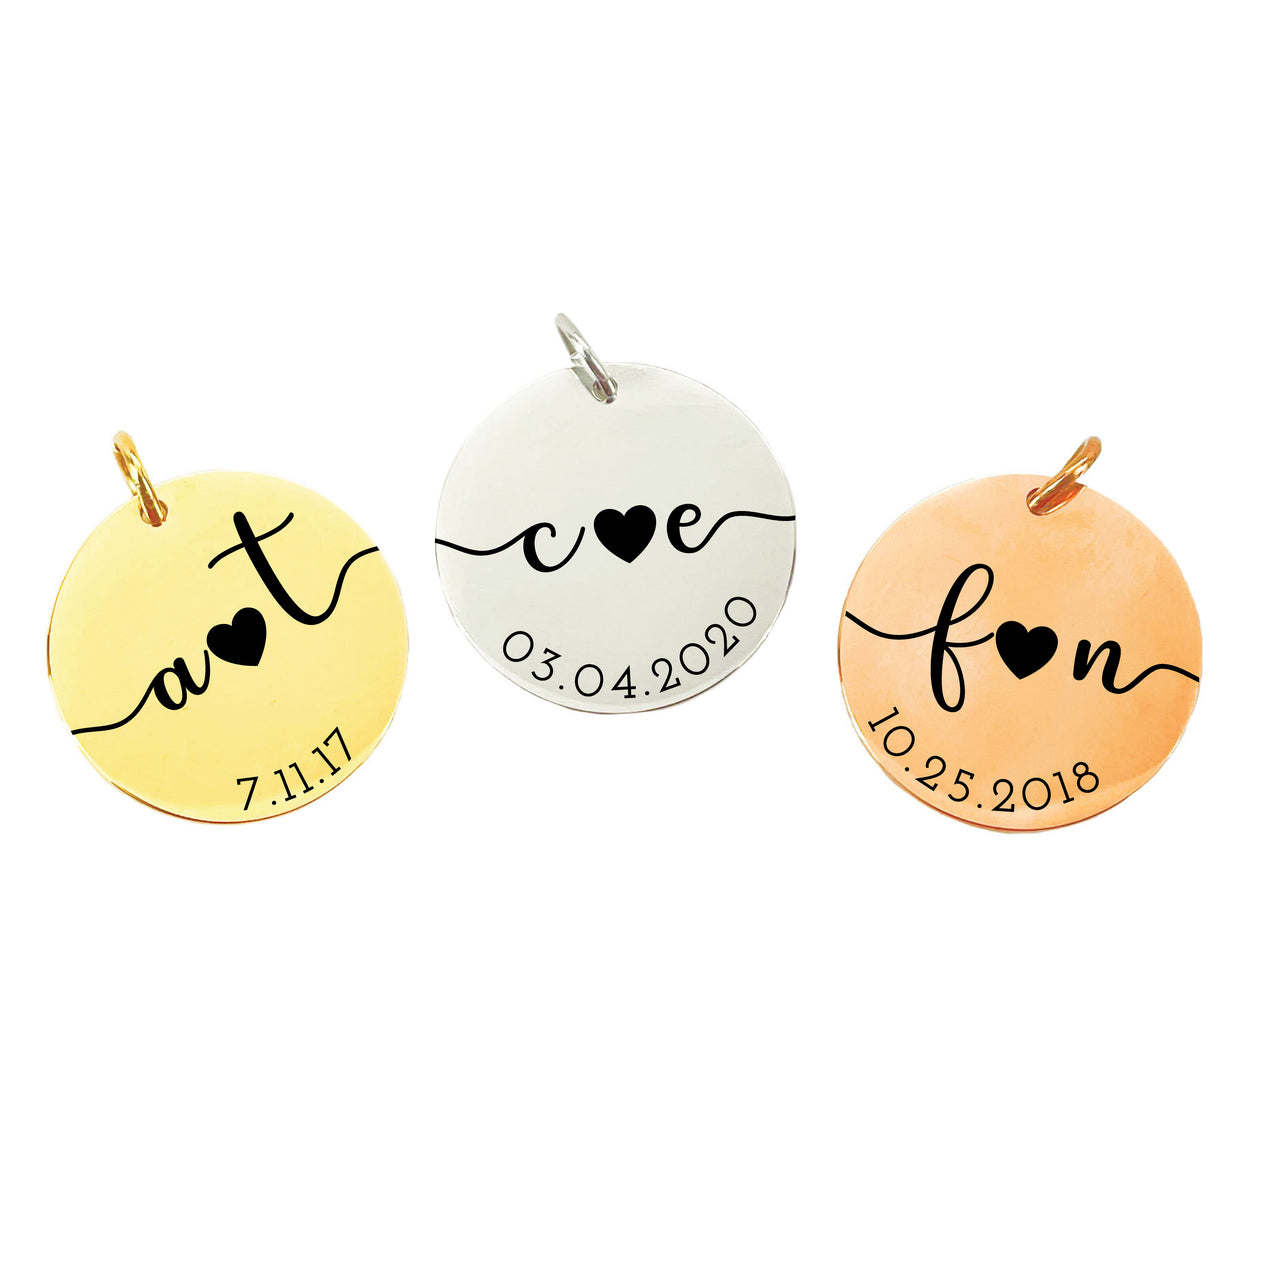 The Kinsley Initials Charm